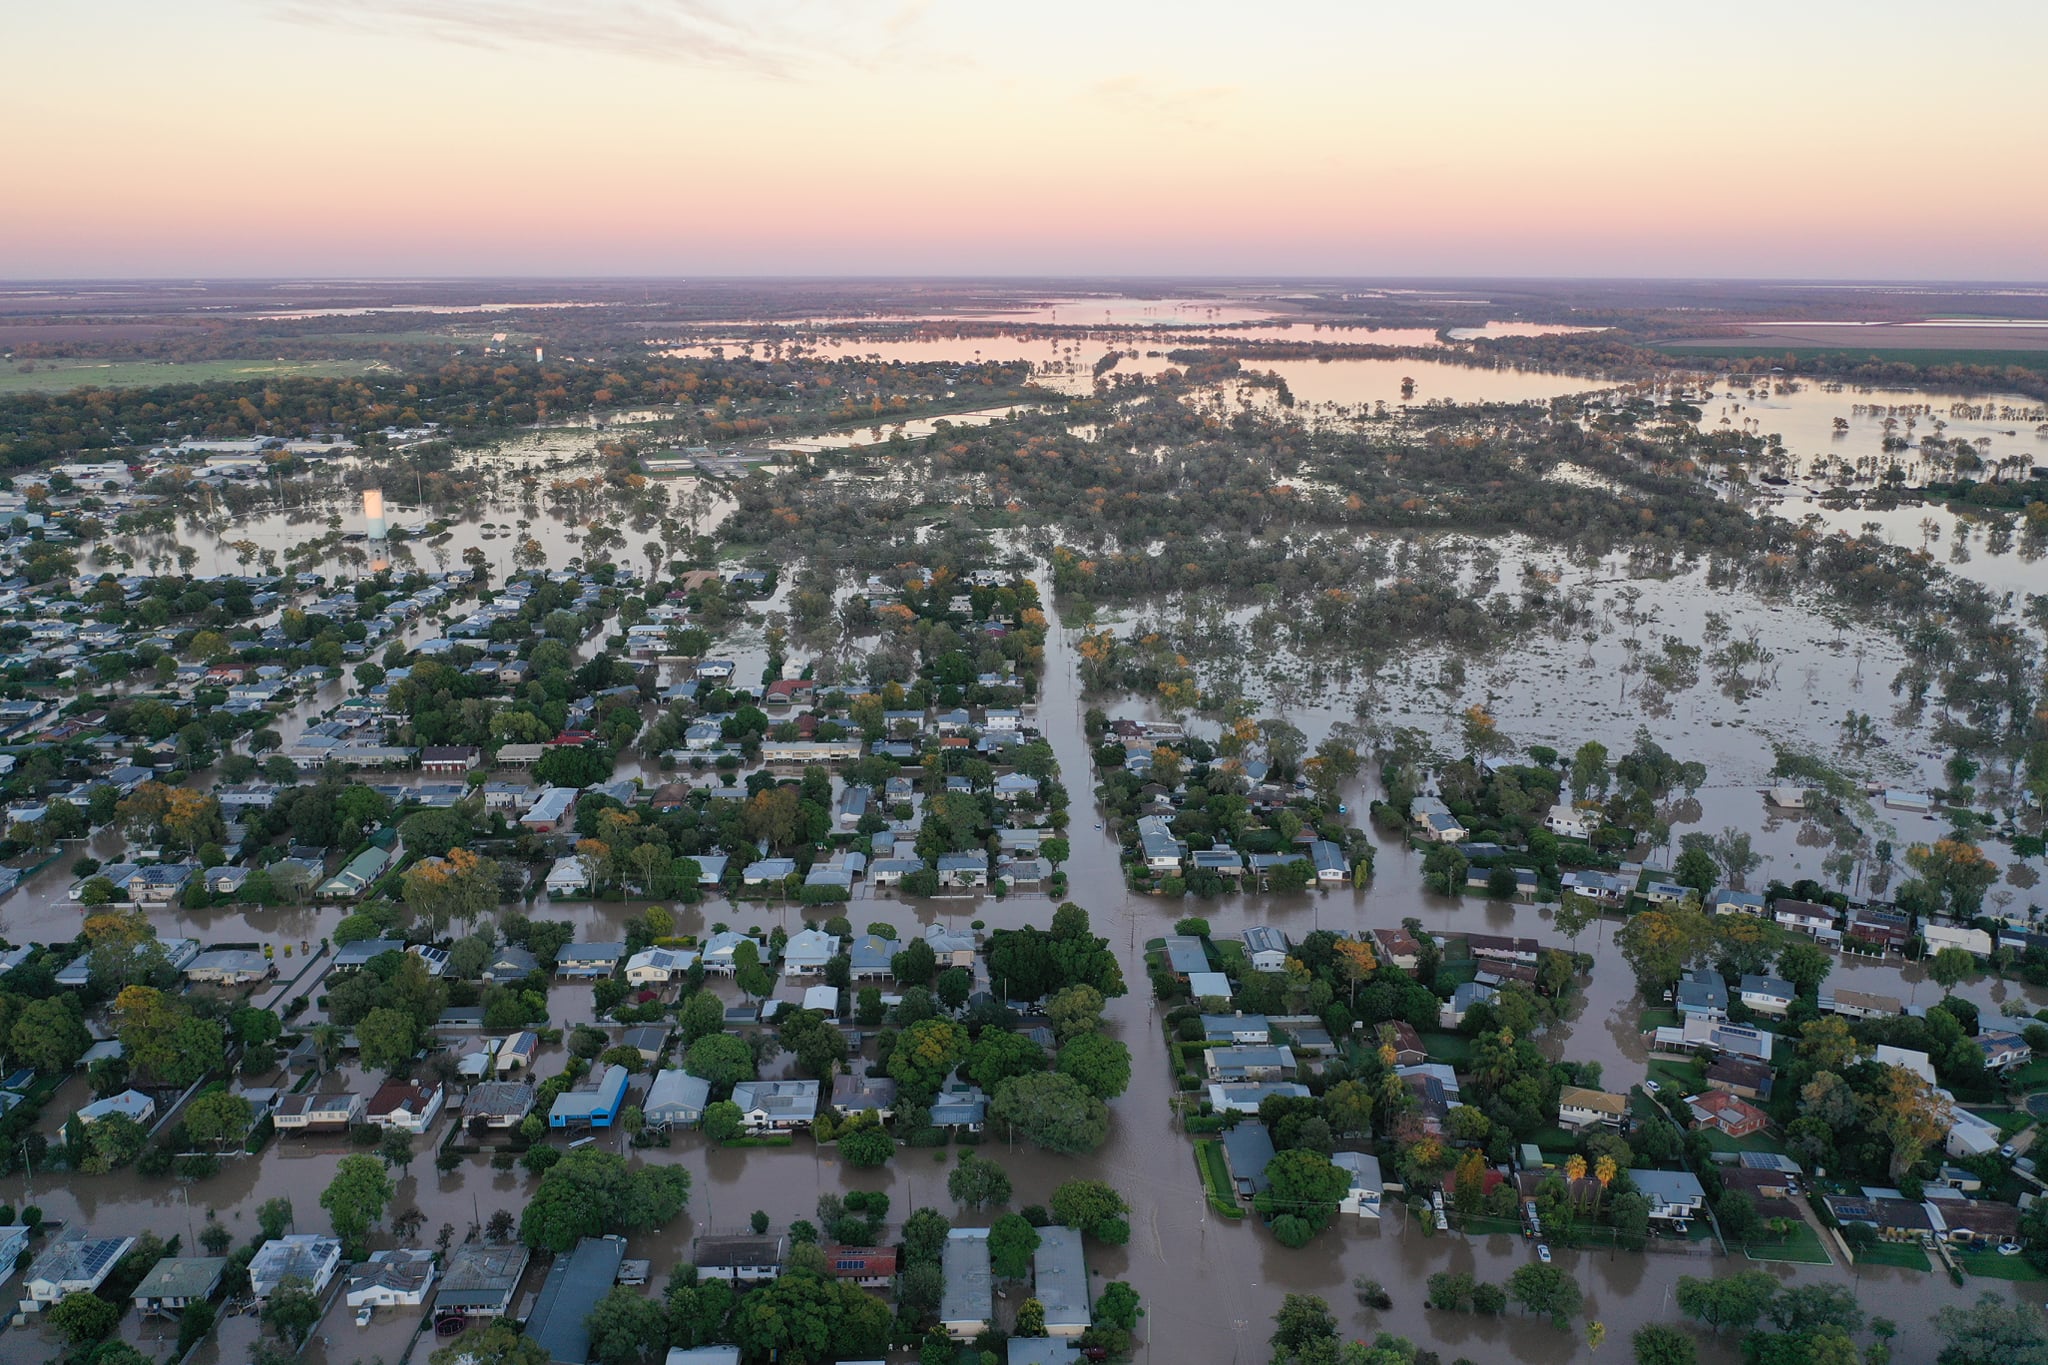 Recovering from the Moree floods: where to find help